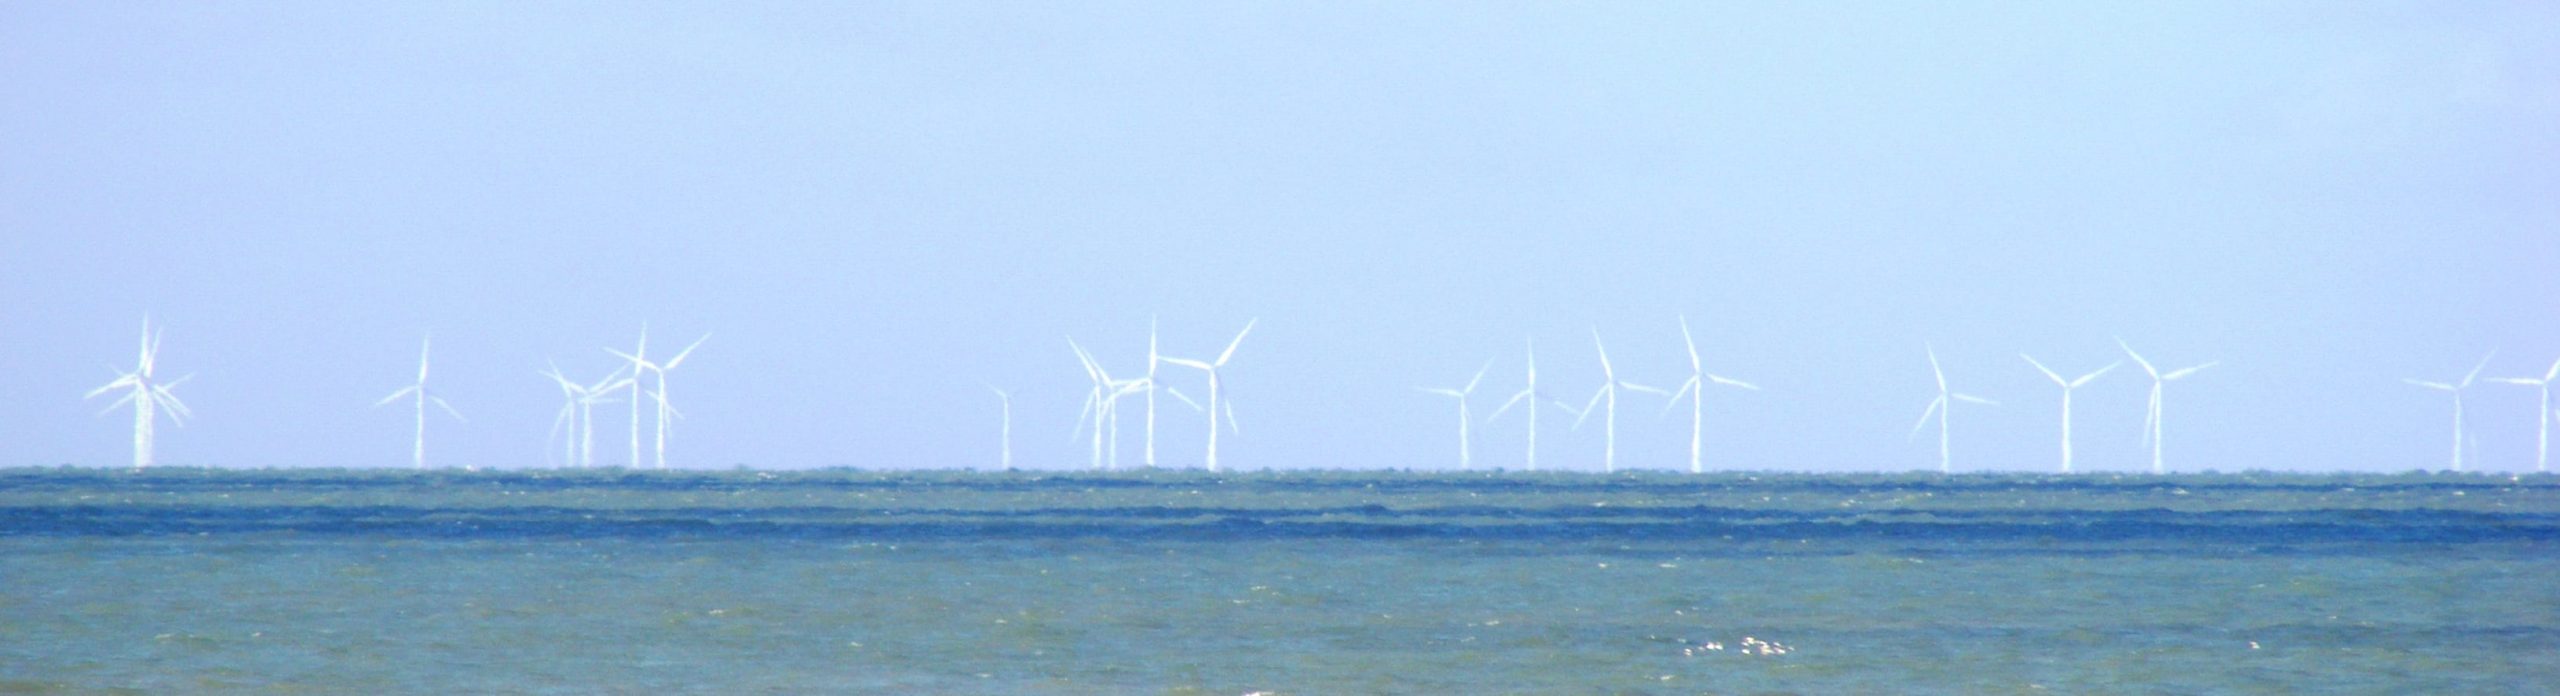 Offshore wind energy may benefit sea life